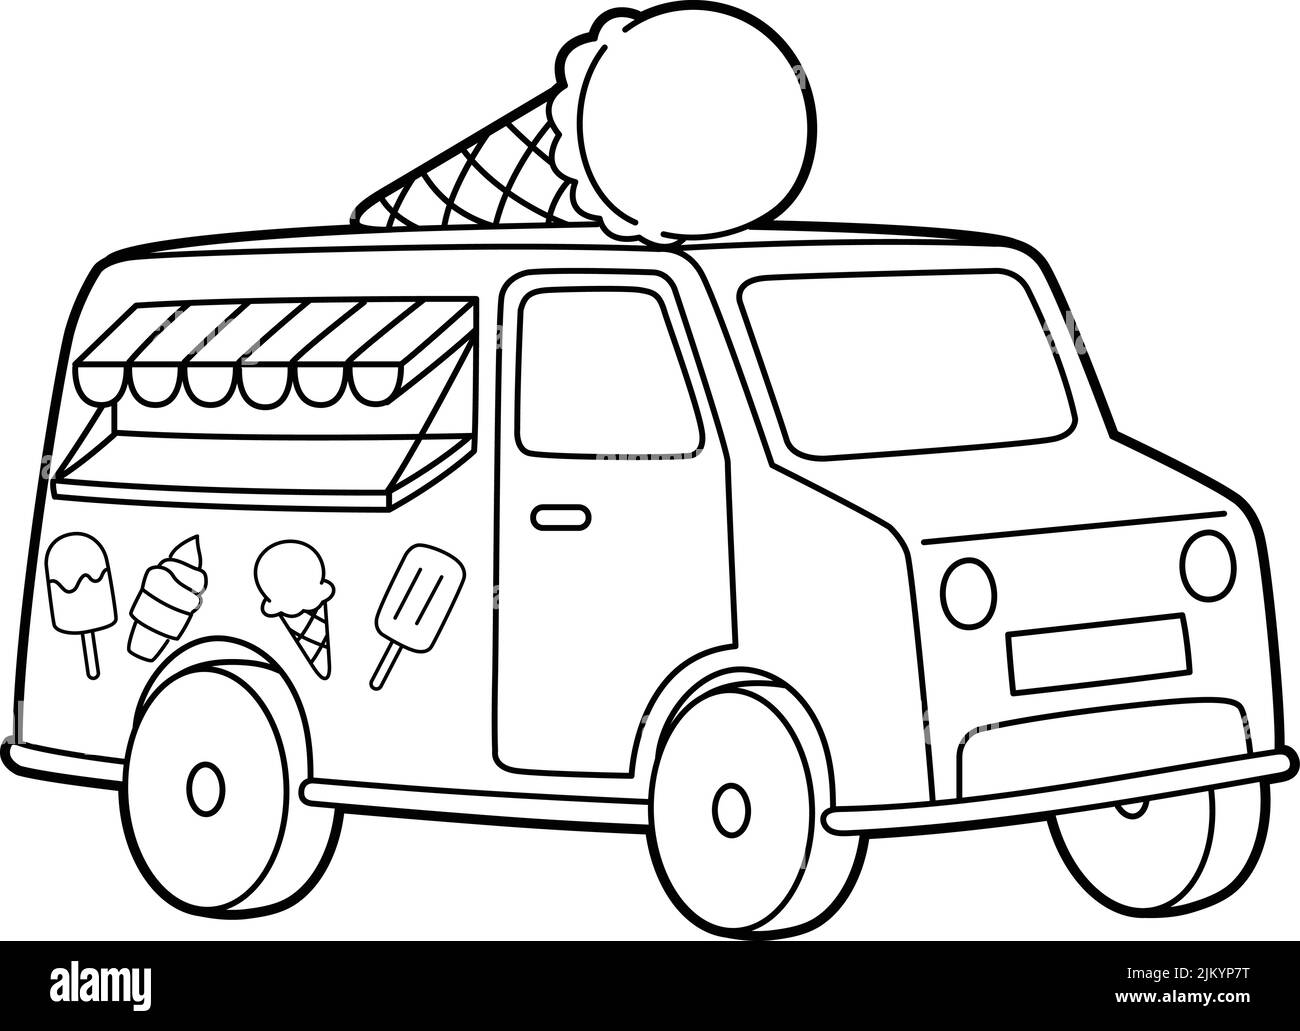 Ice Cream Truck Vehicle Coloring Page for Kids Stock Vector